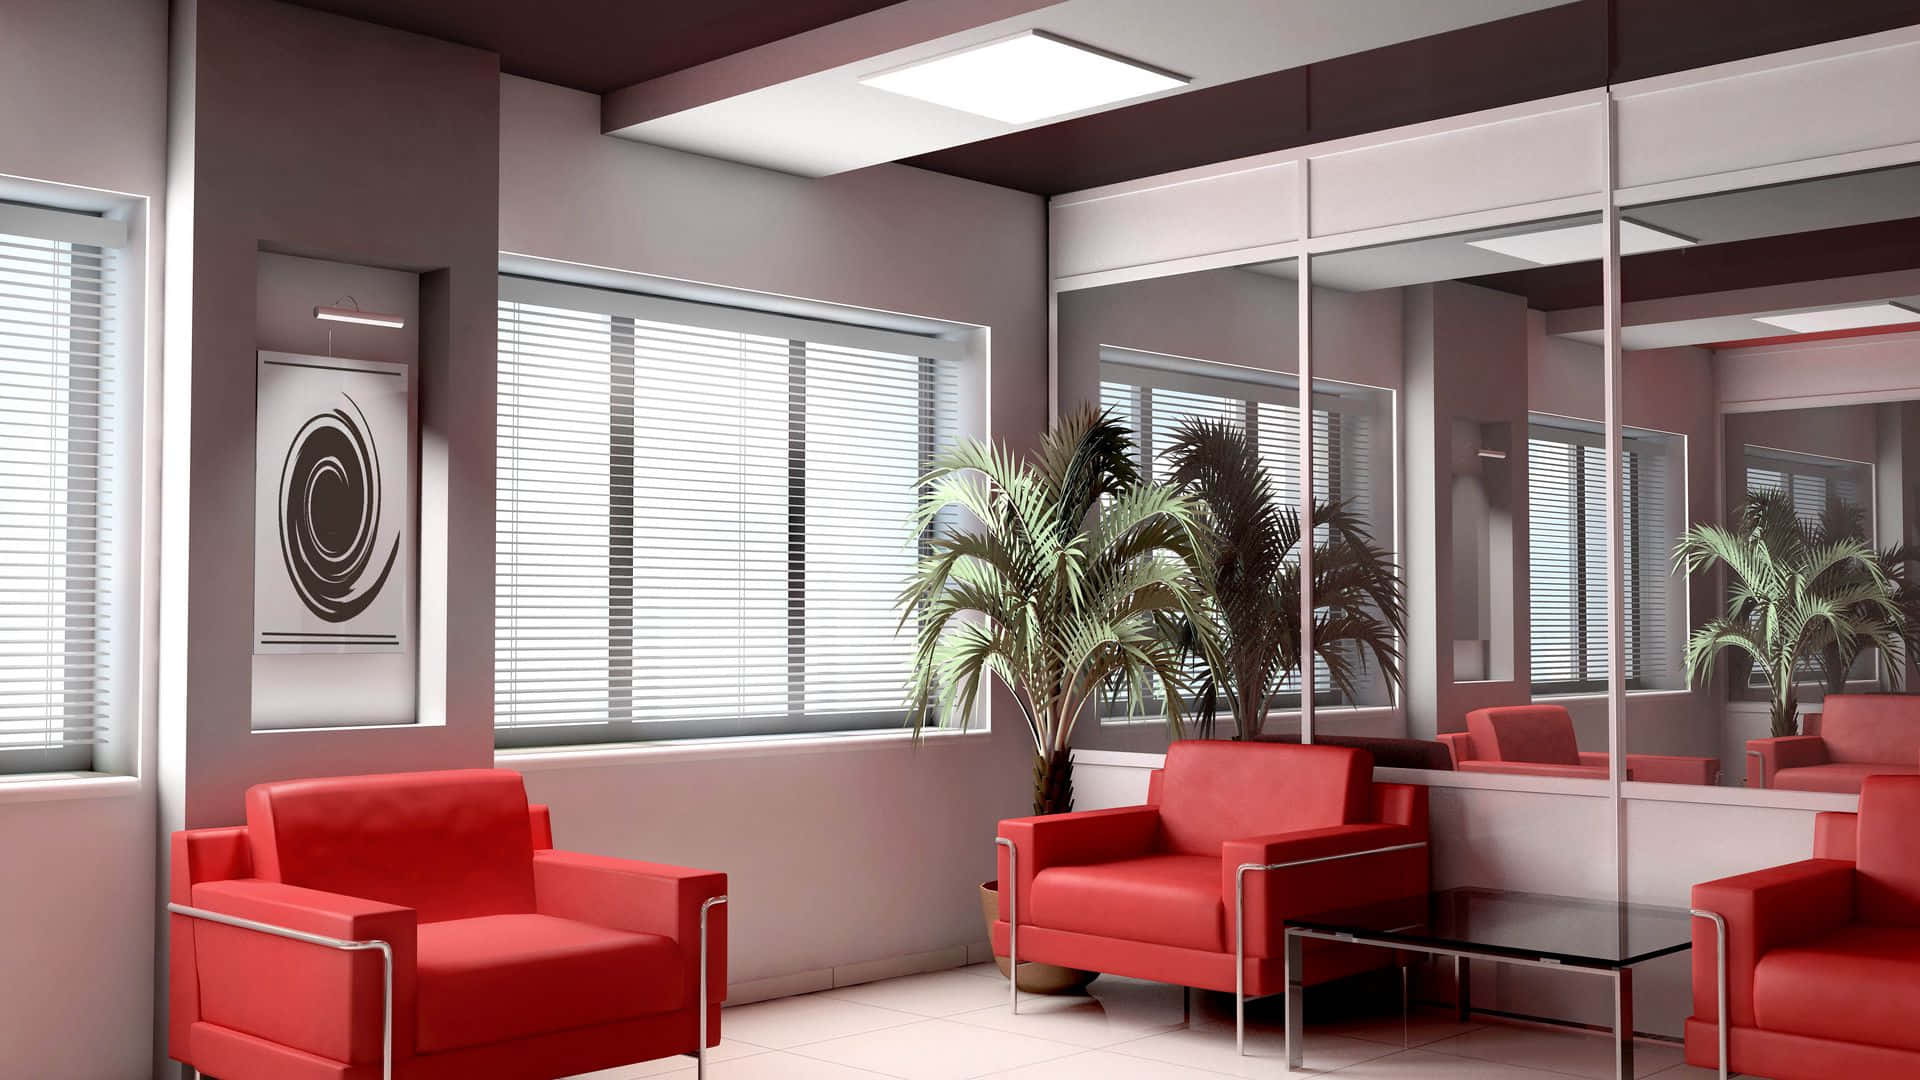 A Modern Office With Red Chairs And Mirrors